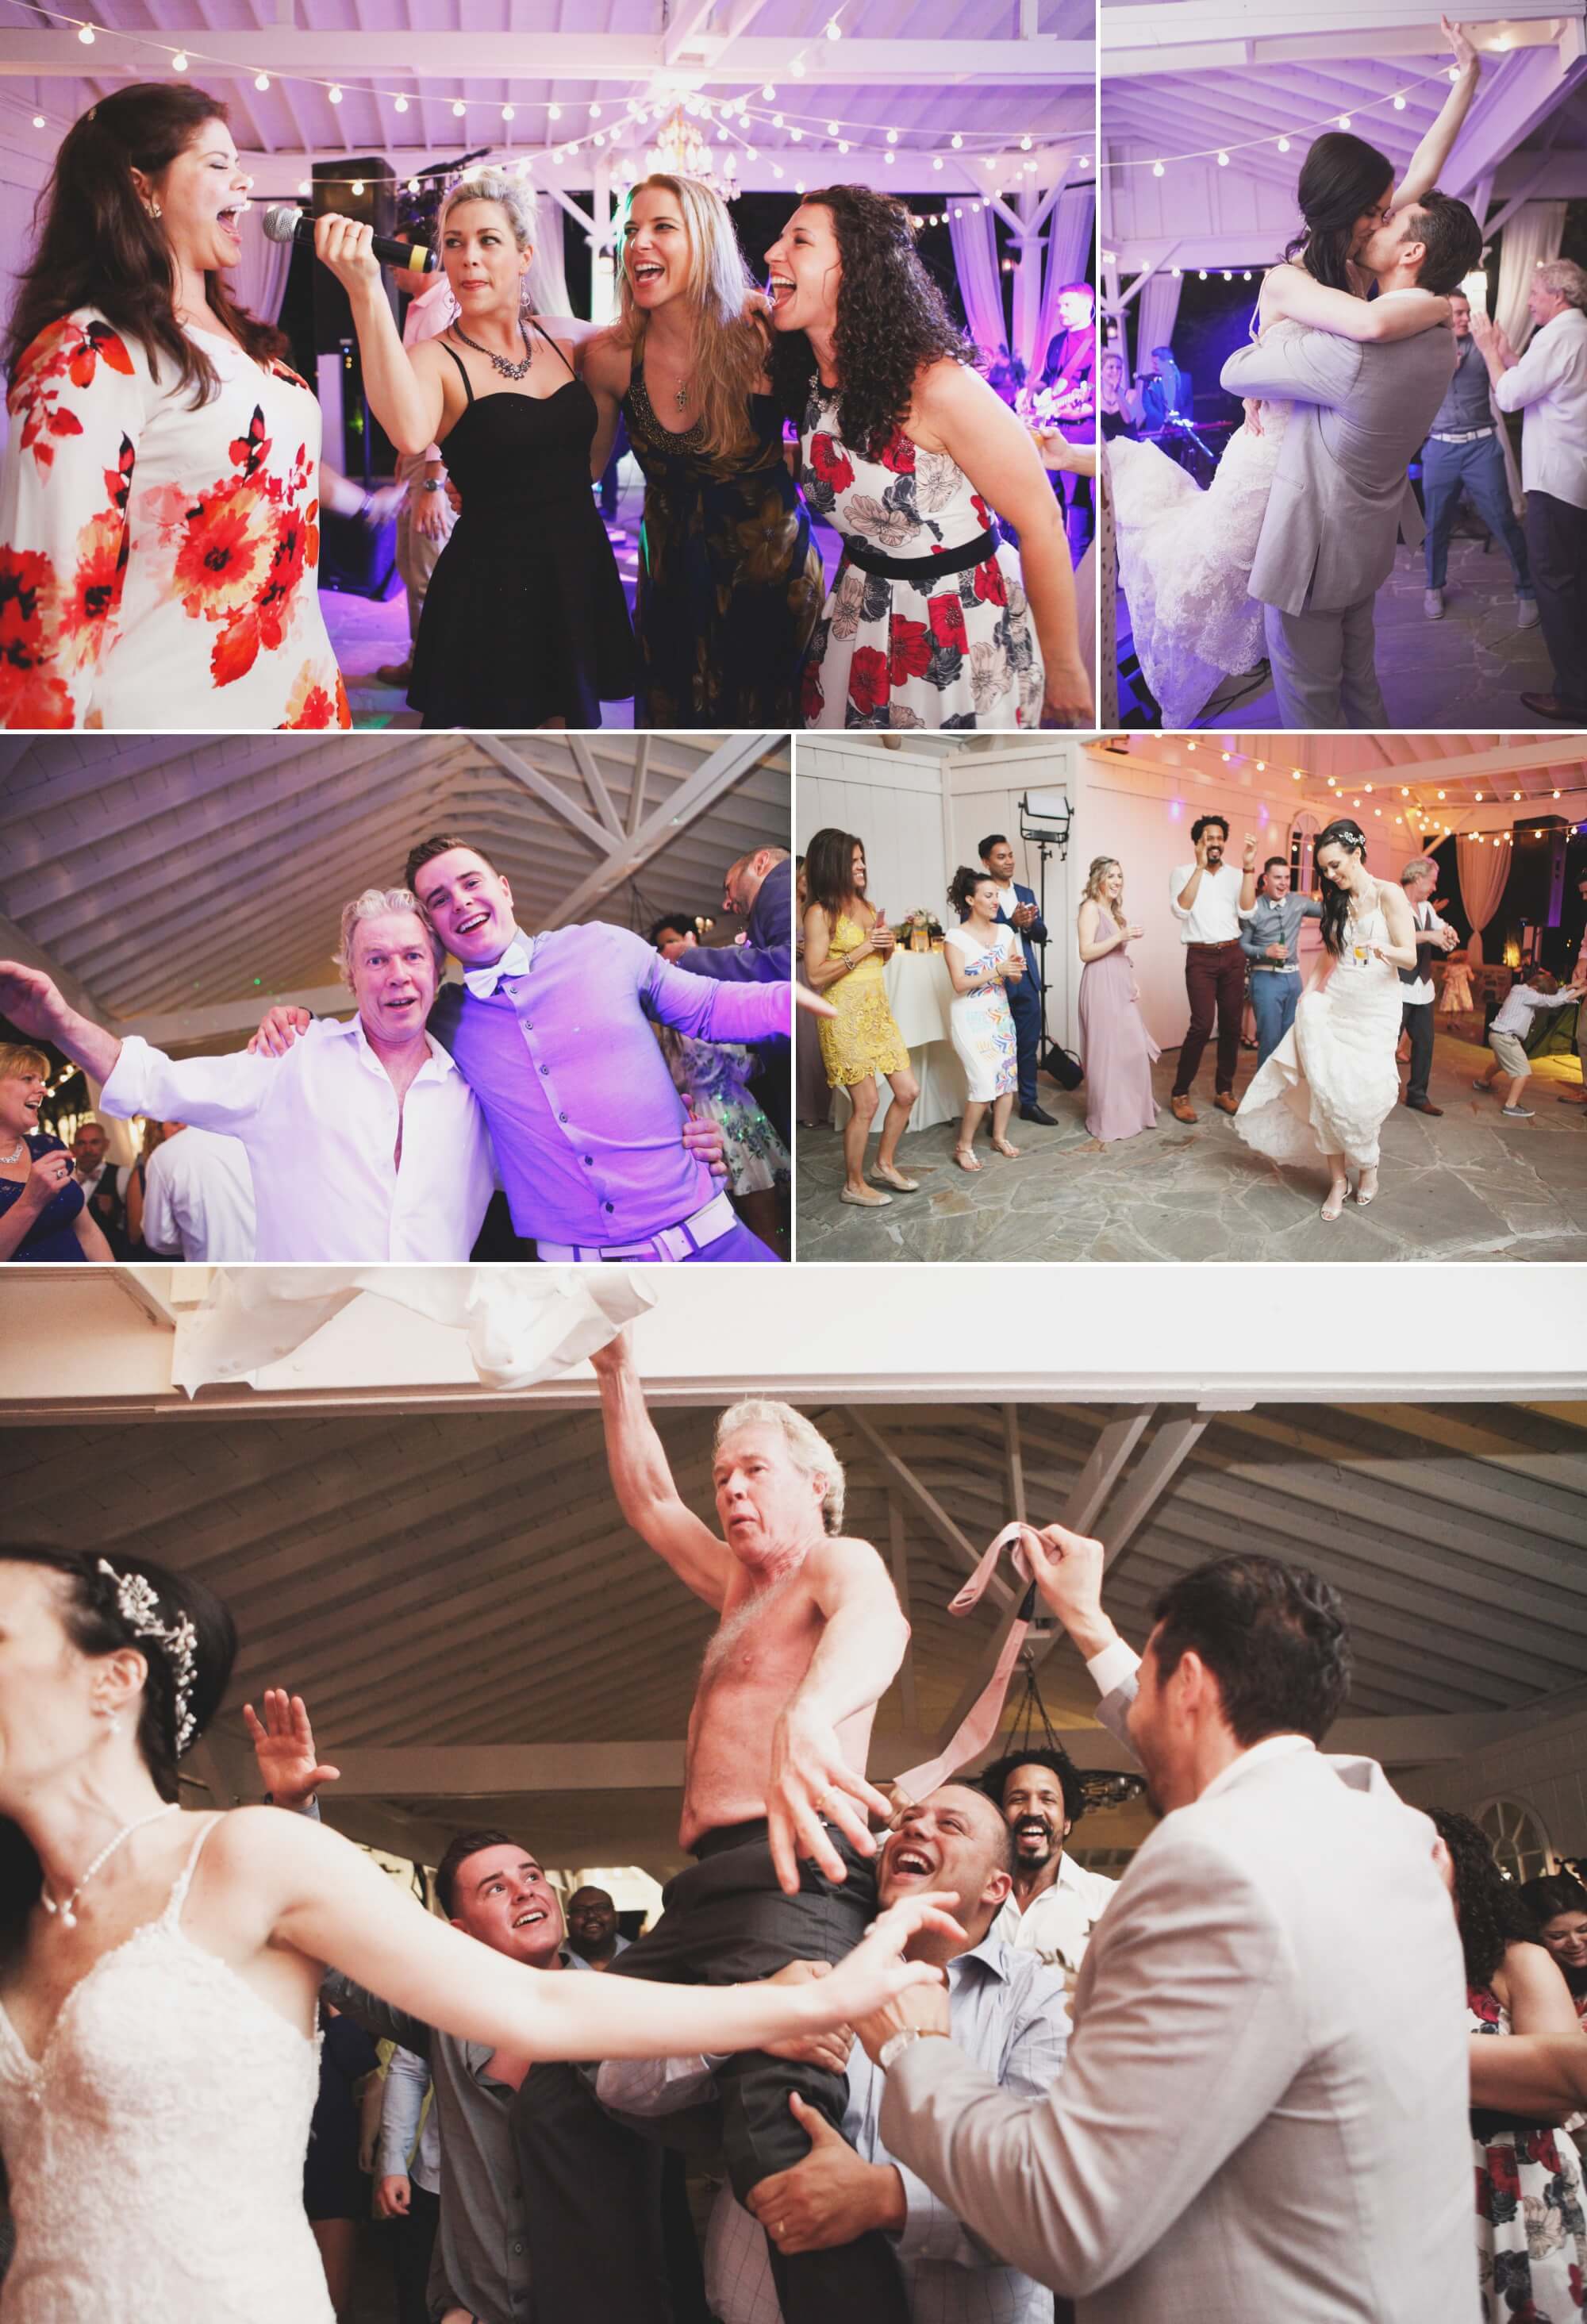 Dancing at reception after wedding ceremony at David and Jennifer's Cedarwood spring wedding in Nashville TN, photography by Krista Lee. 